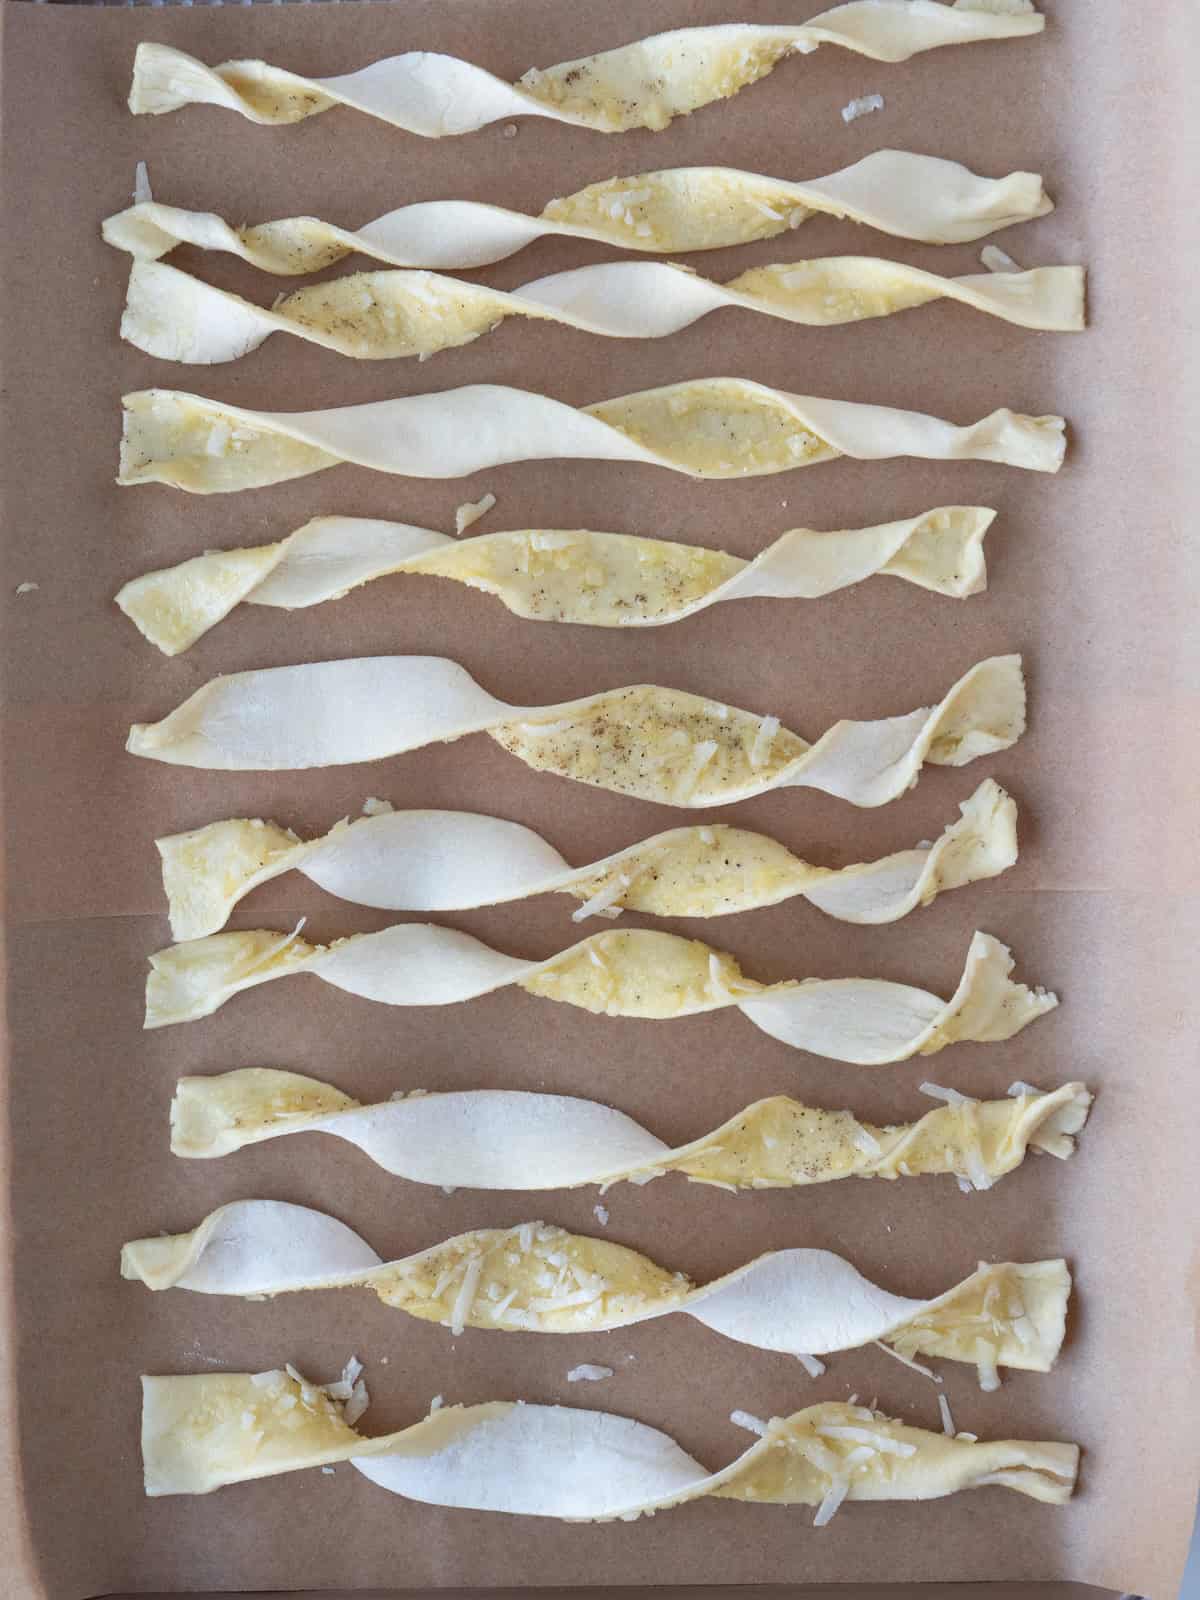 A parchment paper lined baking sheet with strips of puff pastry twisted ready to be baked into cheese straws.